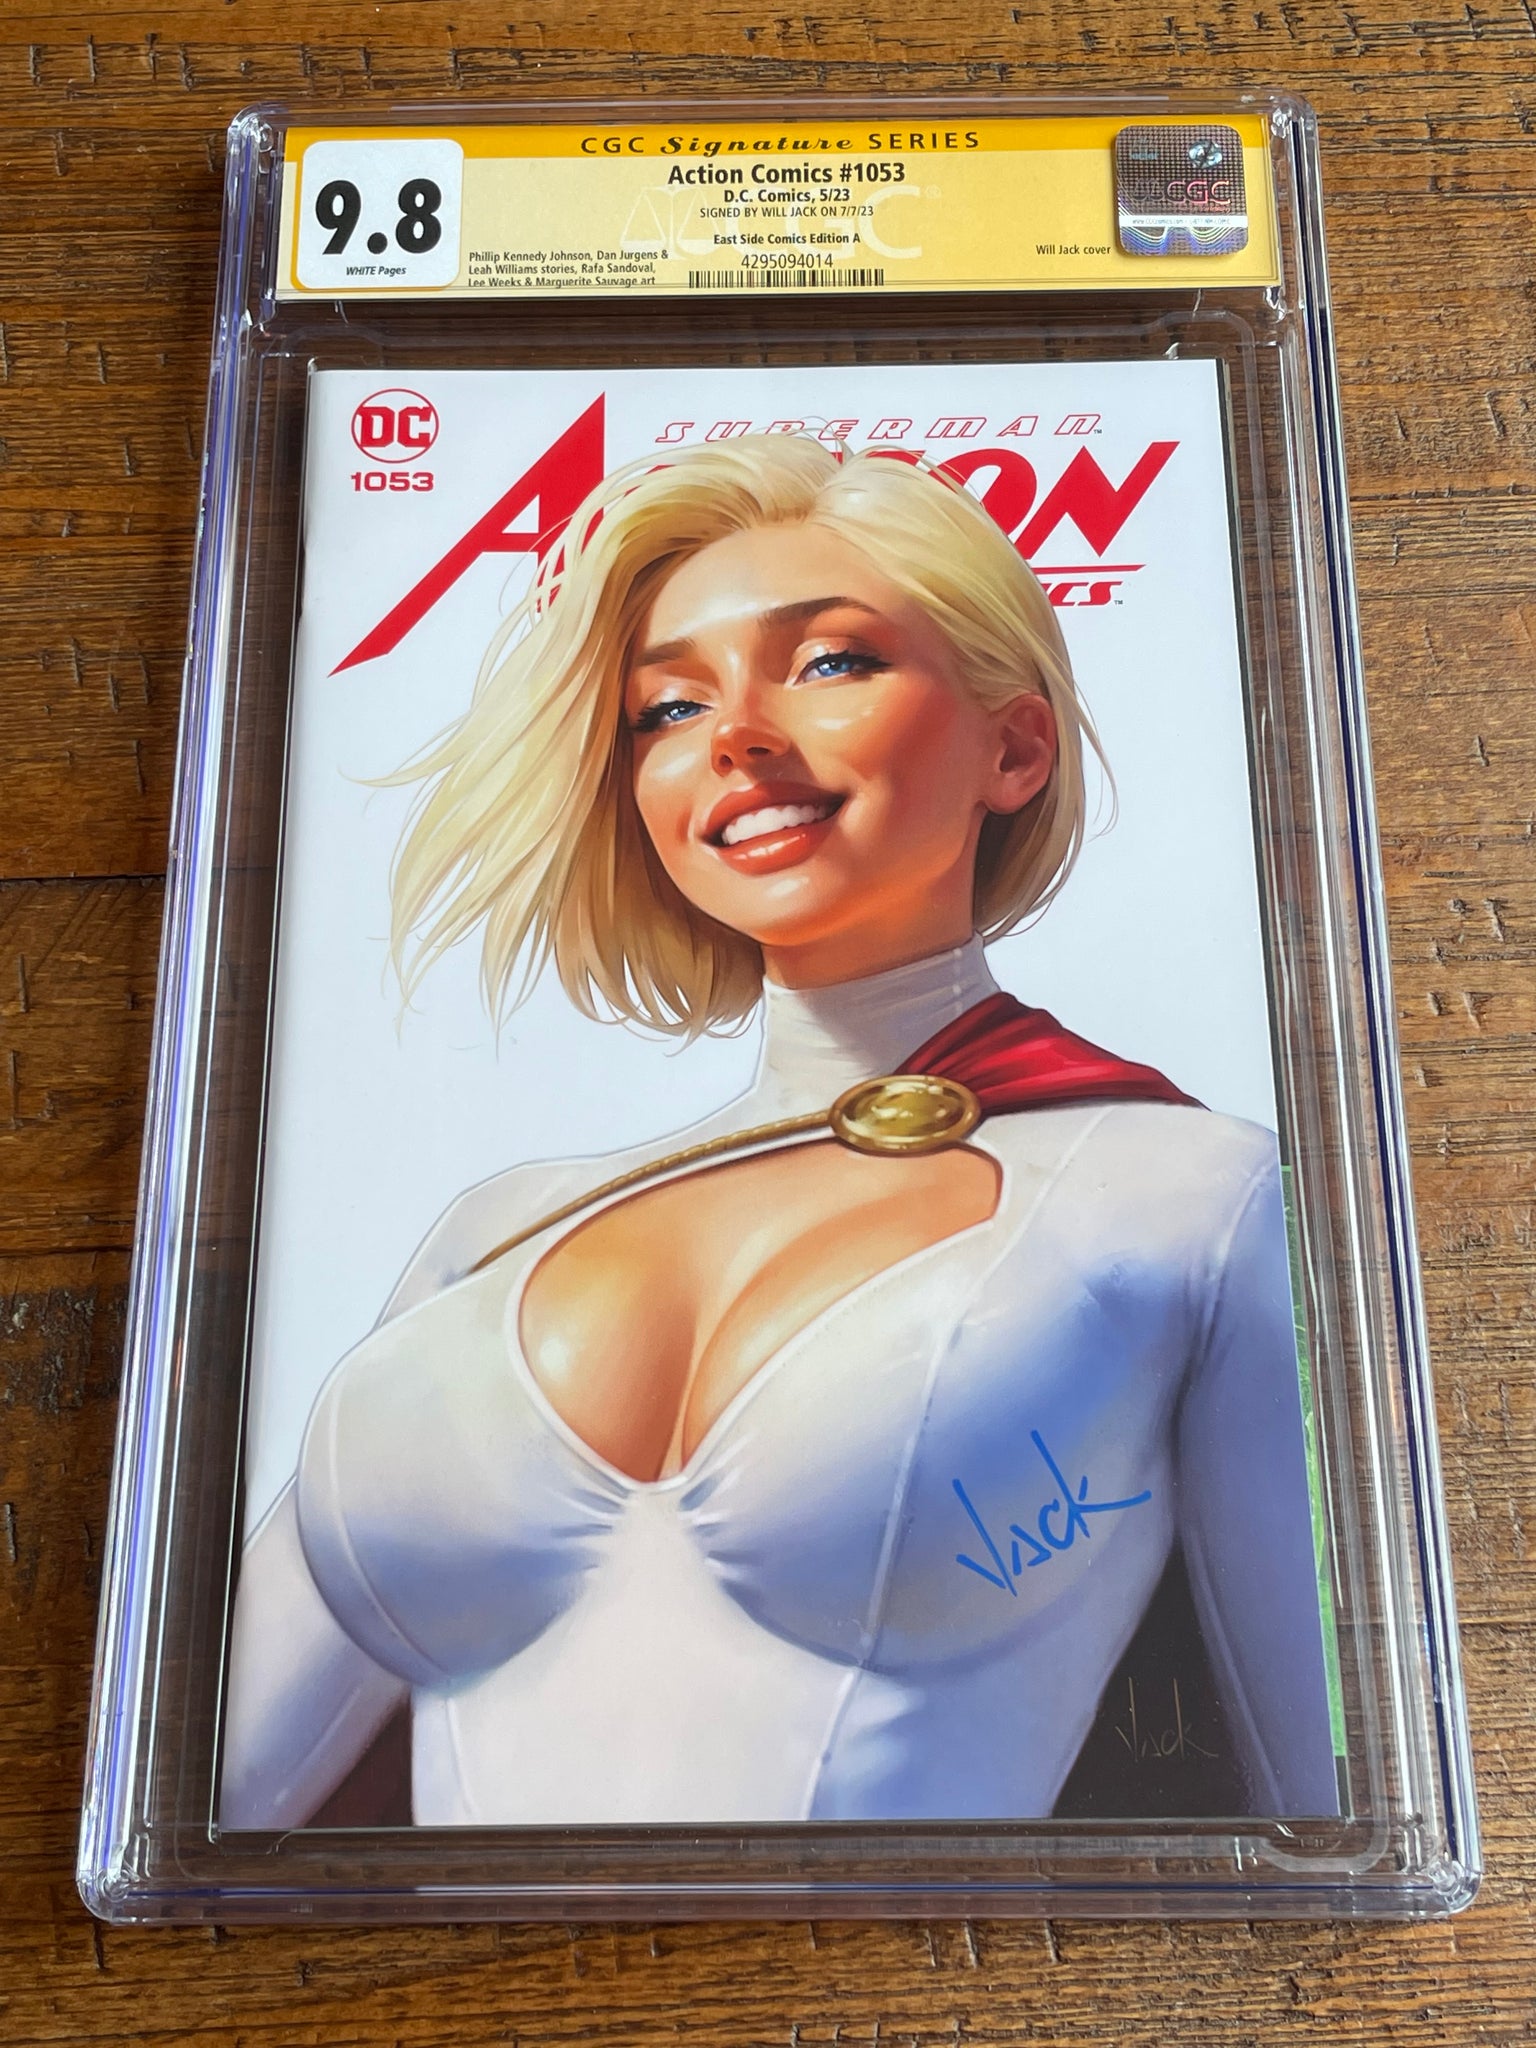 ACTION COMICS #1053 CGC SS 9.8 WILL JACK SIGNED POWER GIRL TRADE VARIANT-A